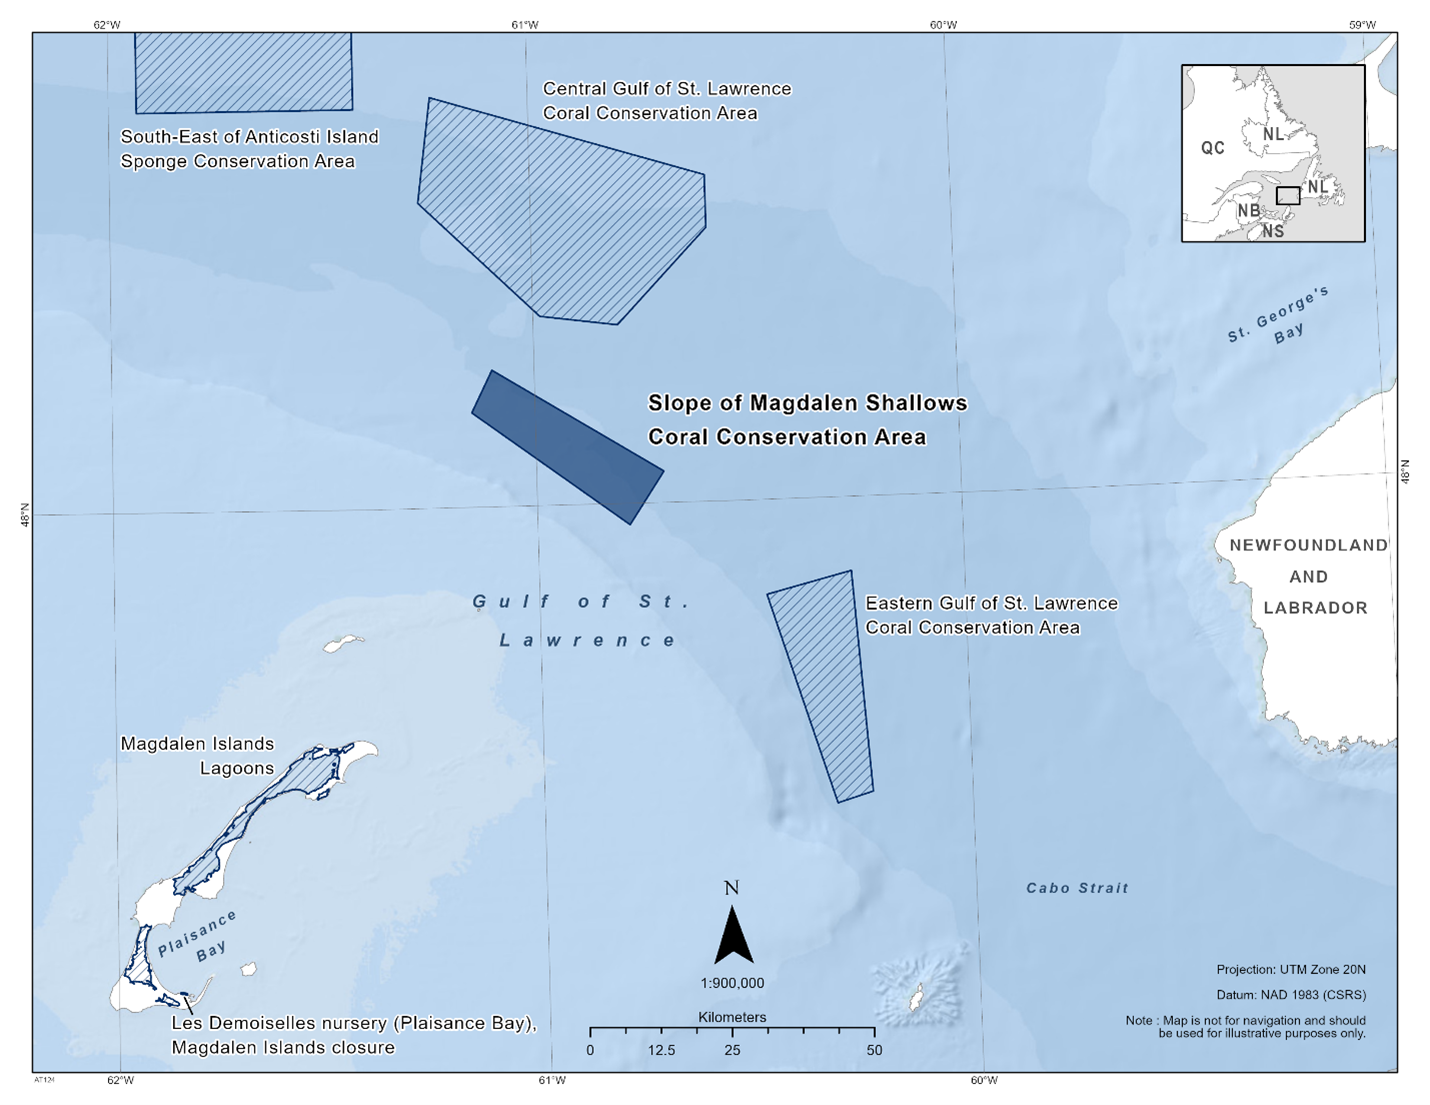 Map of the Slope of Magdalen Shallows Coral Conservation Area depicted in dark blue. The map also includes the marine refuges nearby with dark blue diagonal lines (South-East of Anticosti Island Sponge Conservation Area, Central Gulf of St. Lawrence Coral Conservation Area, Eastern Gulf of St. Lawrence Coral Conservation Area, Magdalen Islands Lagoons closure).